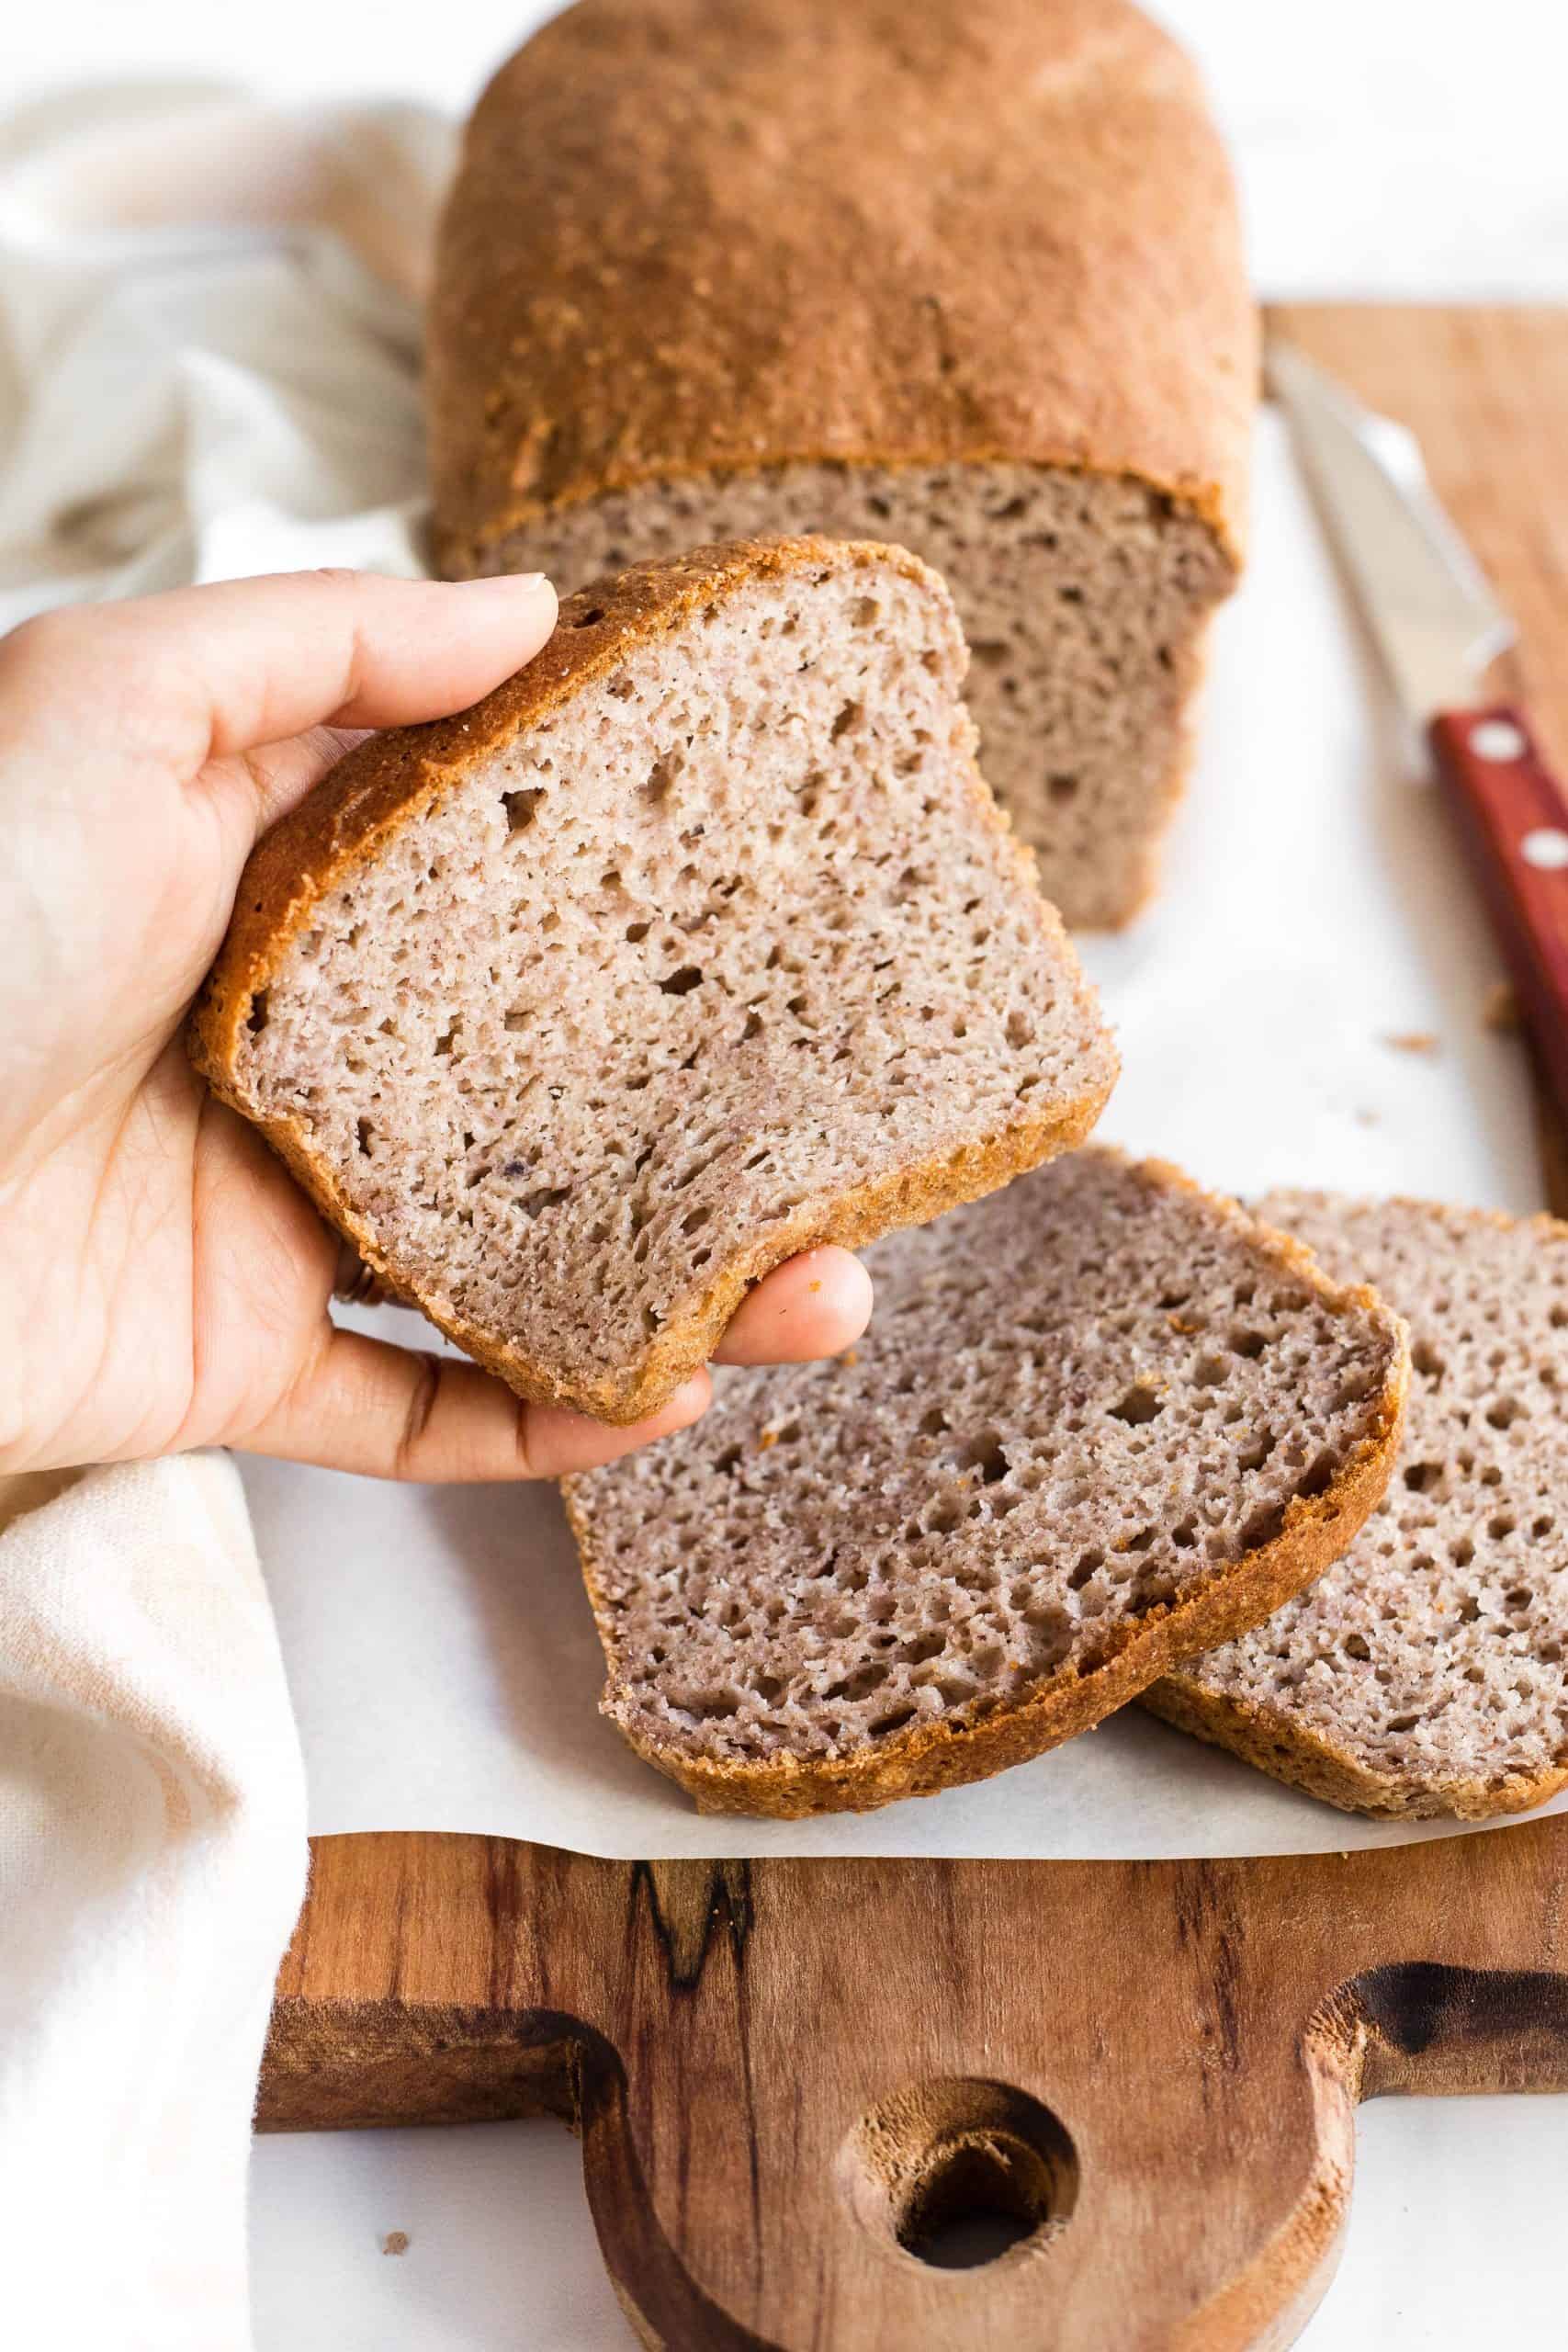 Hand squishing a slice of gluten-free brown bread.